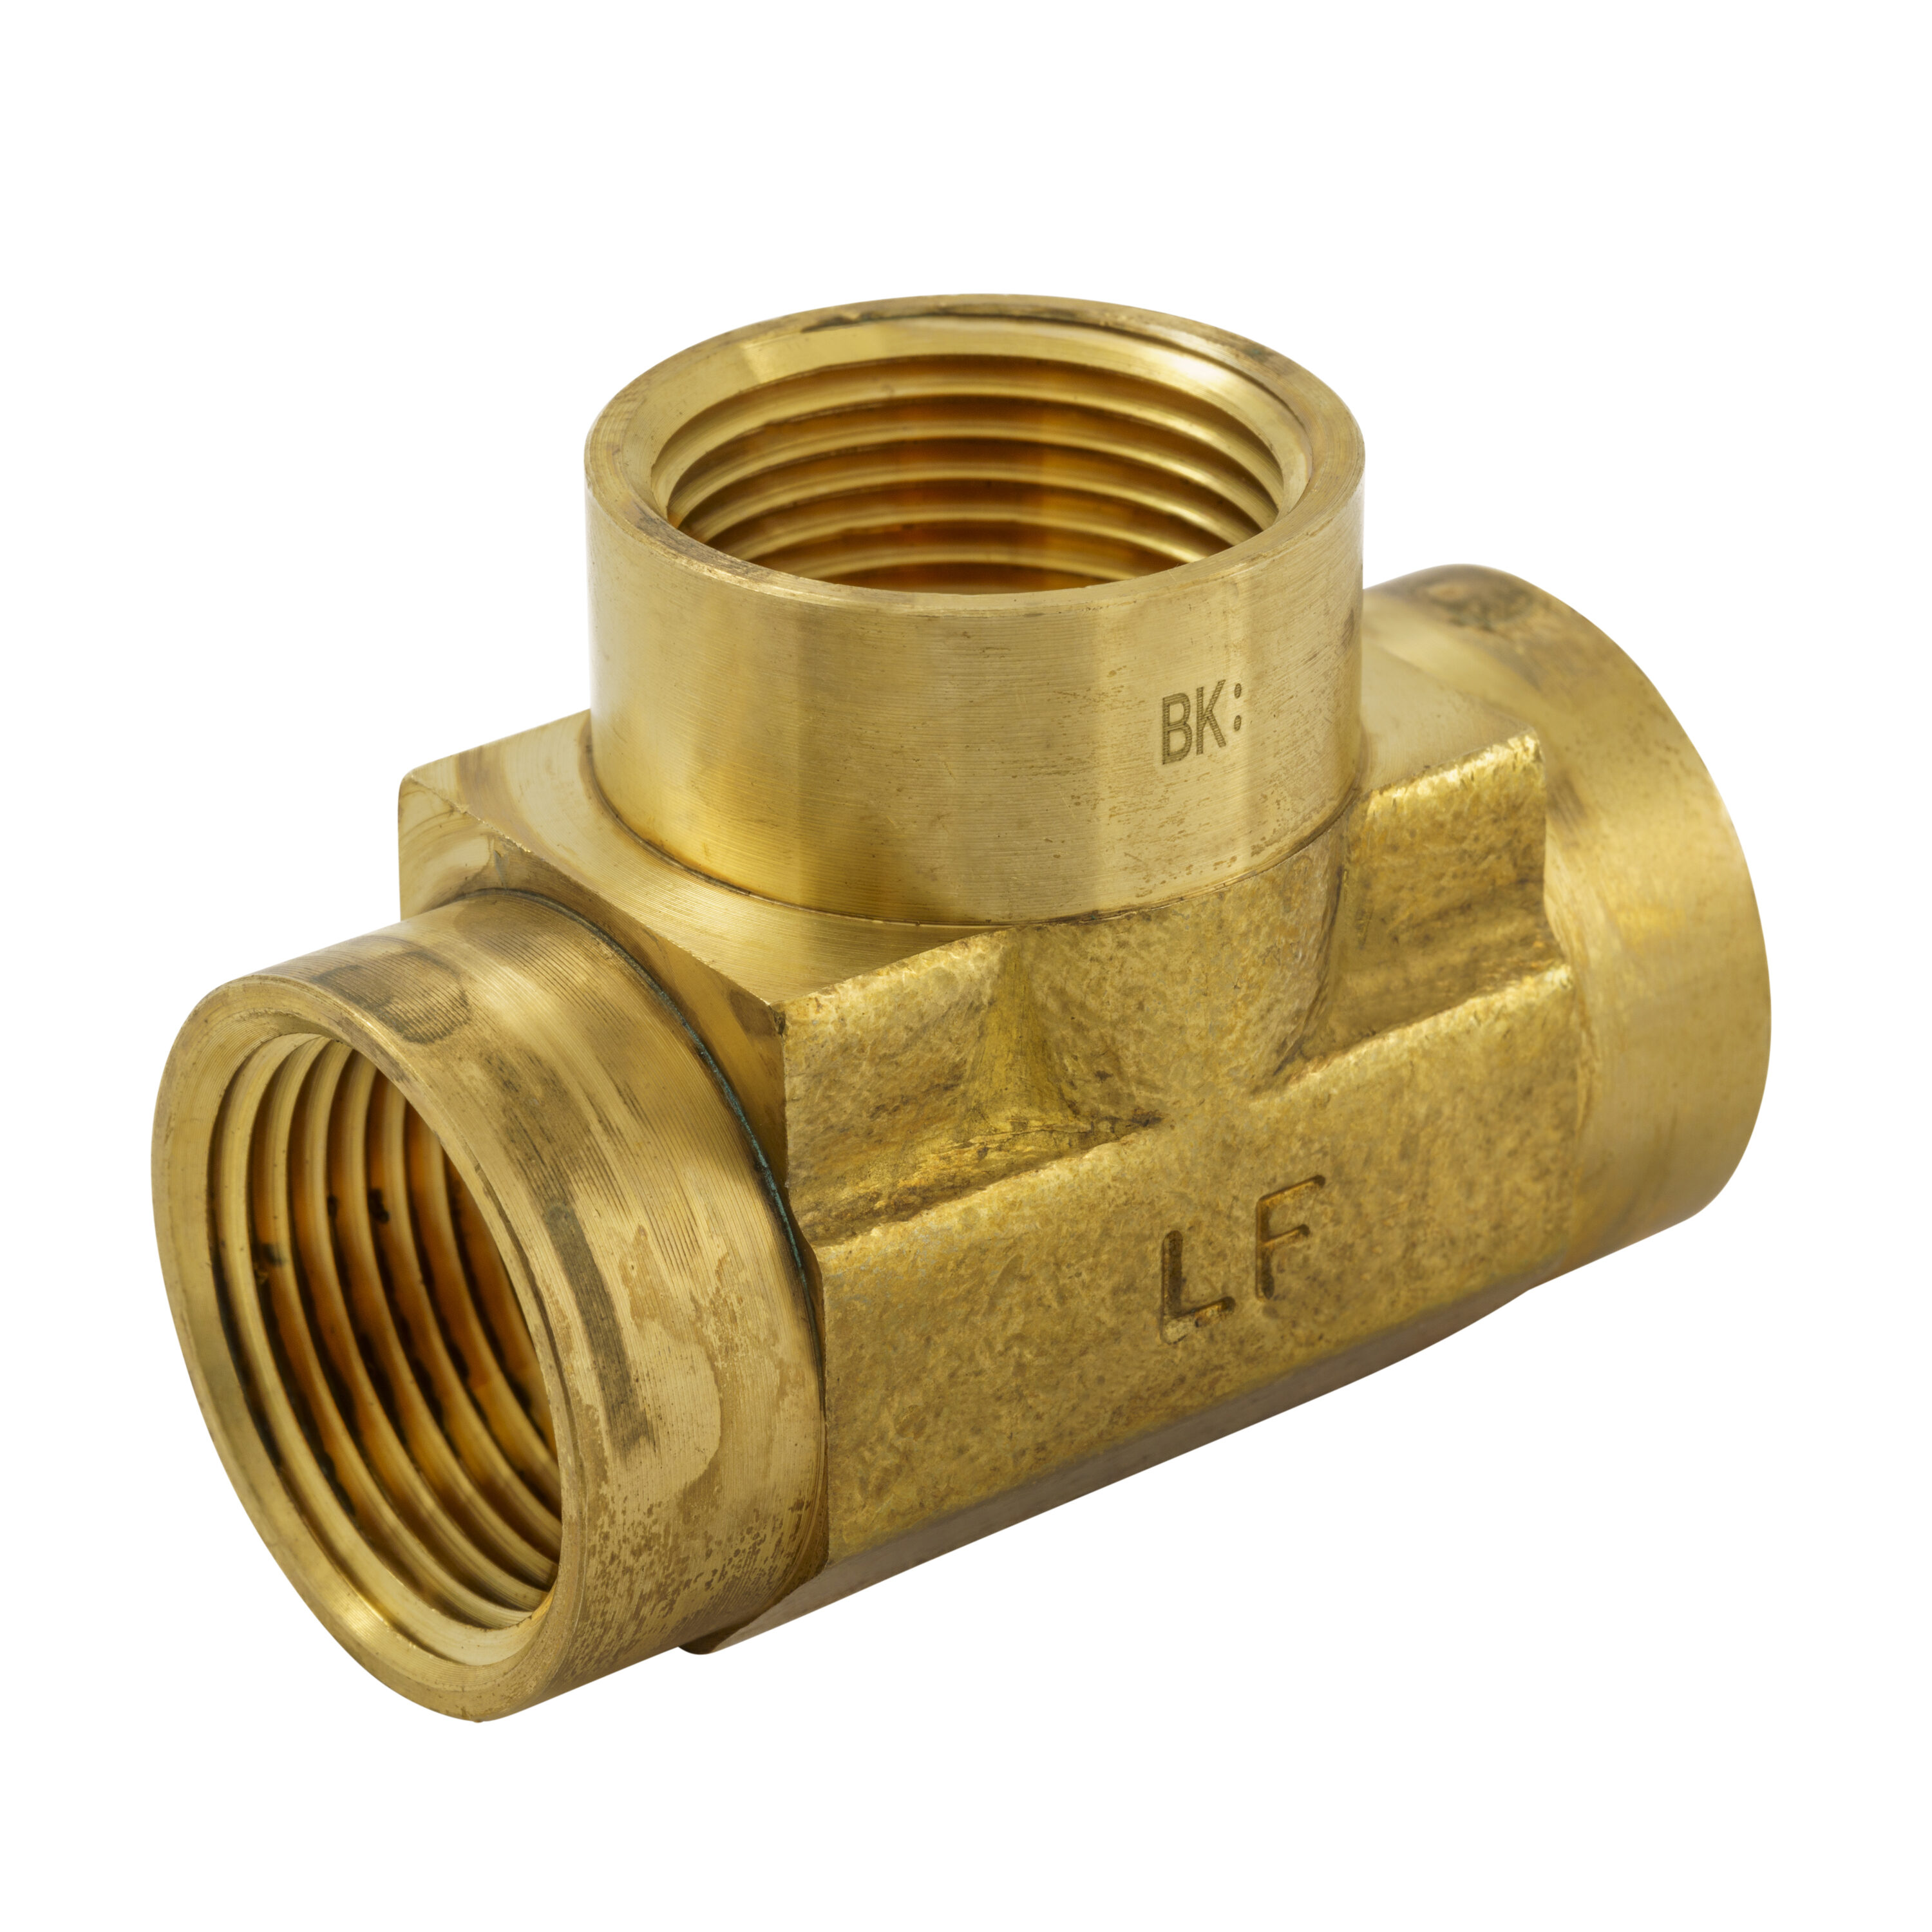 Proline Series 3/4-in x 1/2-in Threaded Male Adapter Fitting in the Brass  Fittings department at